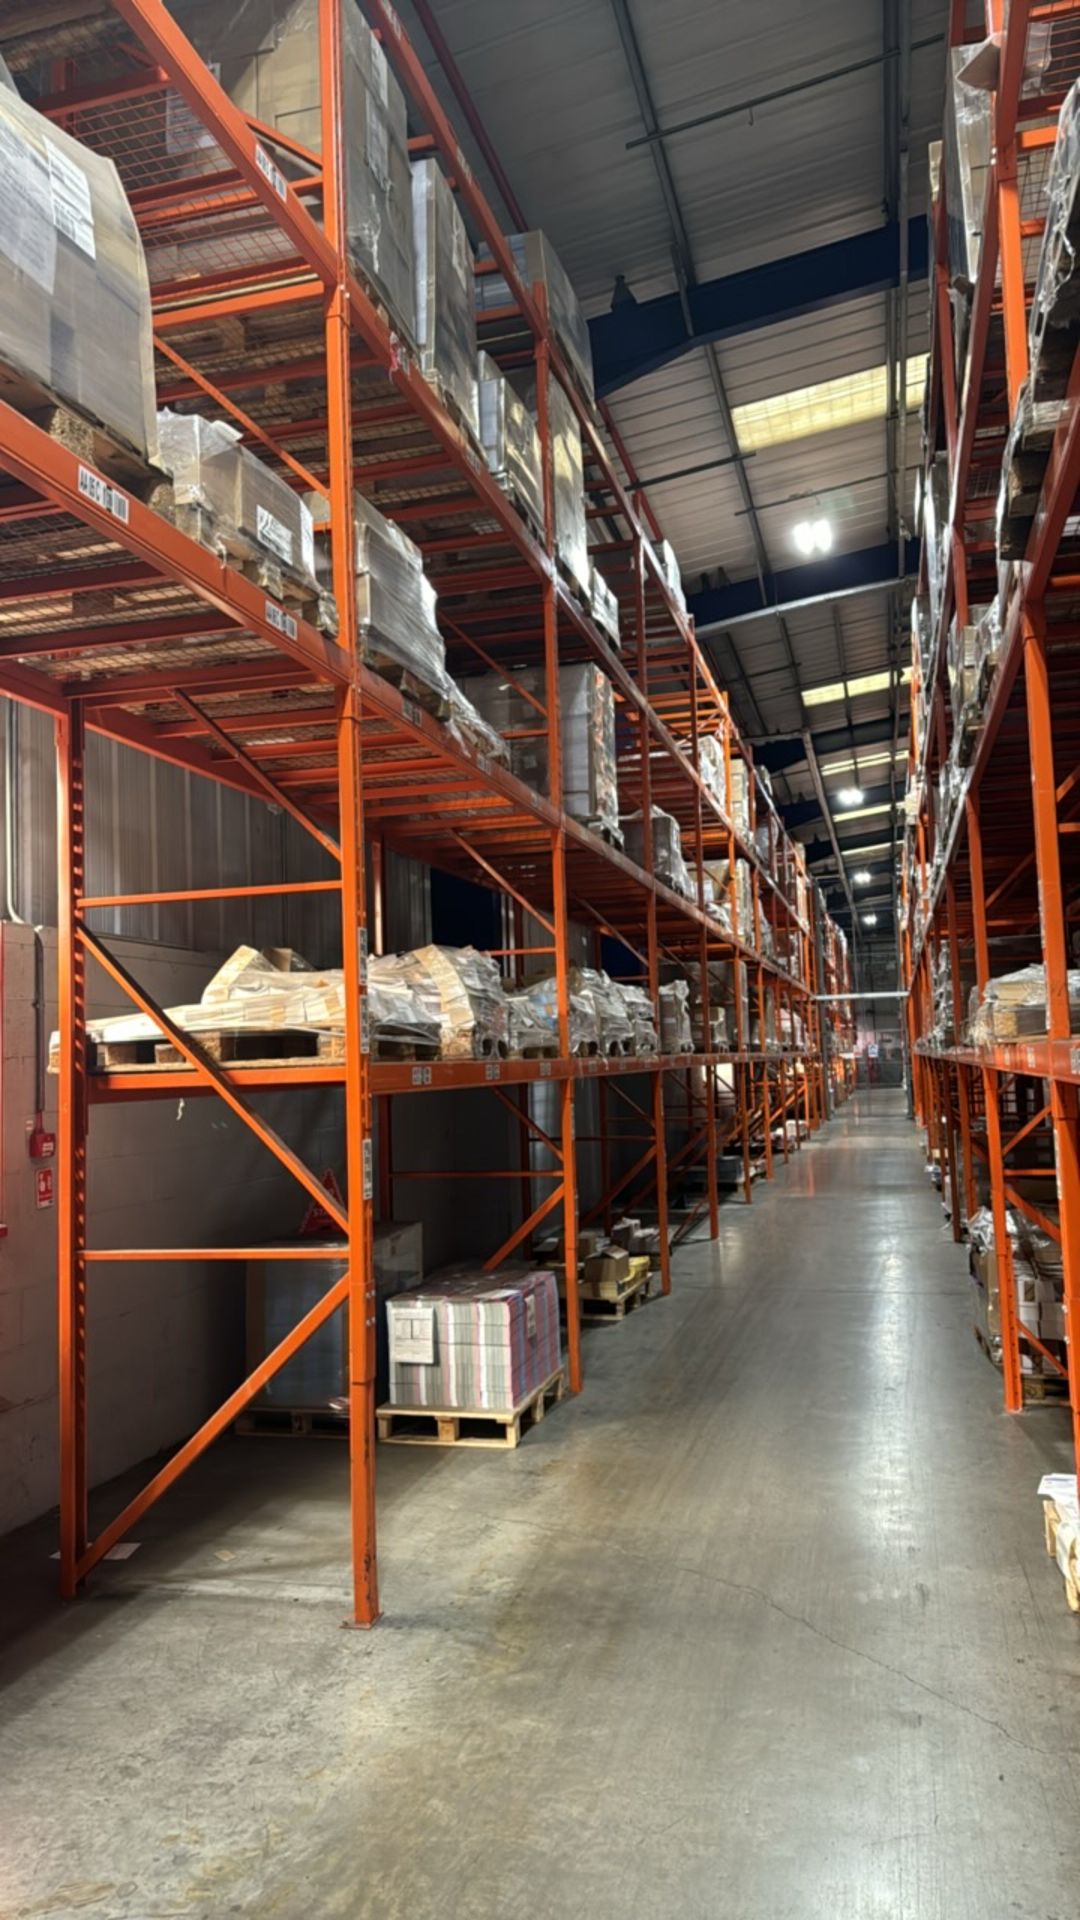 23 Bays Of Boltless Pallet Racking - Image 9 of 10